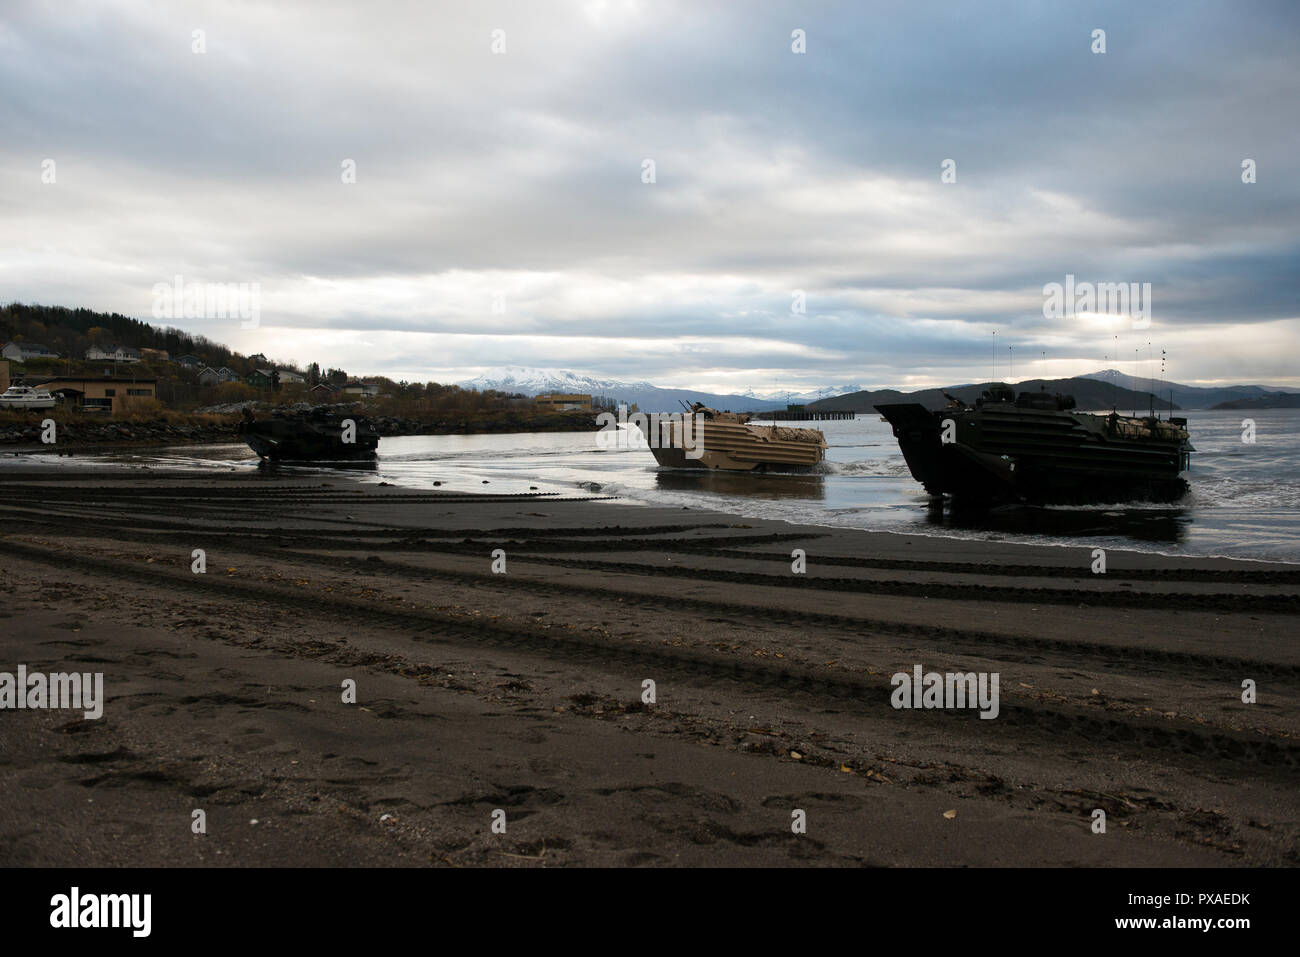 181017-VO150-0782 (Oct. 17, 2018)- The second wave of assault amphibious vehicles from the 2nd Assault Amphibian Battalion, 2nd Marine Division, drives onto the beach in Bogen, Norway, Oct. 2018, during Exercise Northern Screen. Northern Screen is a bilateral exercise involving the United States Marine Corps’ Marine Rotational Force-Europe (MRF-E) and Norwegian military, and is taking place in vicinity of Setermoen, Norway, from Oct. 24 to Nov. 7, 2018. (U.S. Navy photo by Mass Communication Specialist 2nd Class Kenneth Gardner/Released) Stock Photo